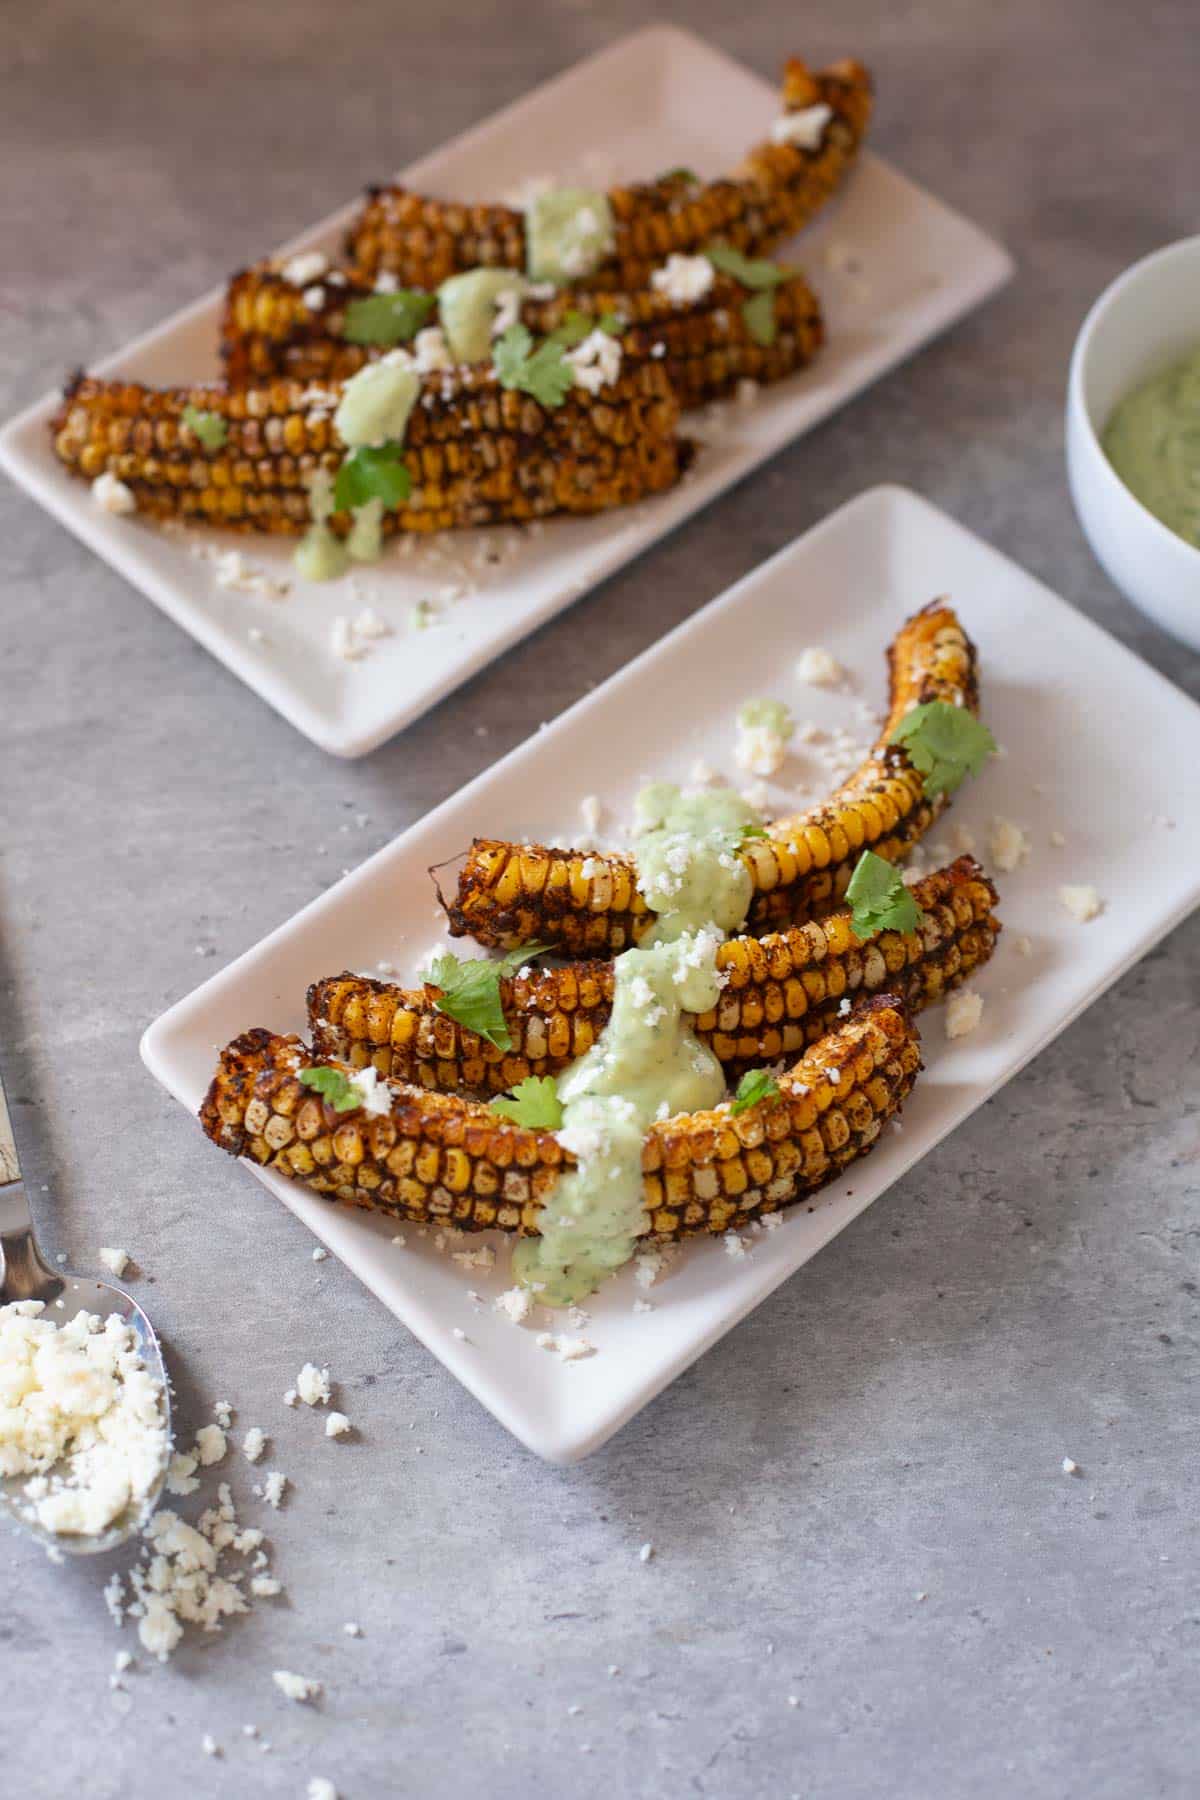 corn ribs with cotija cheese in a spoon and cilantro lime sauce in bowl